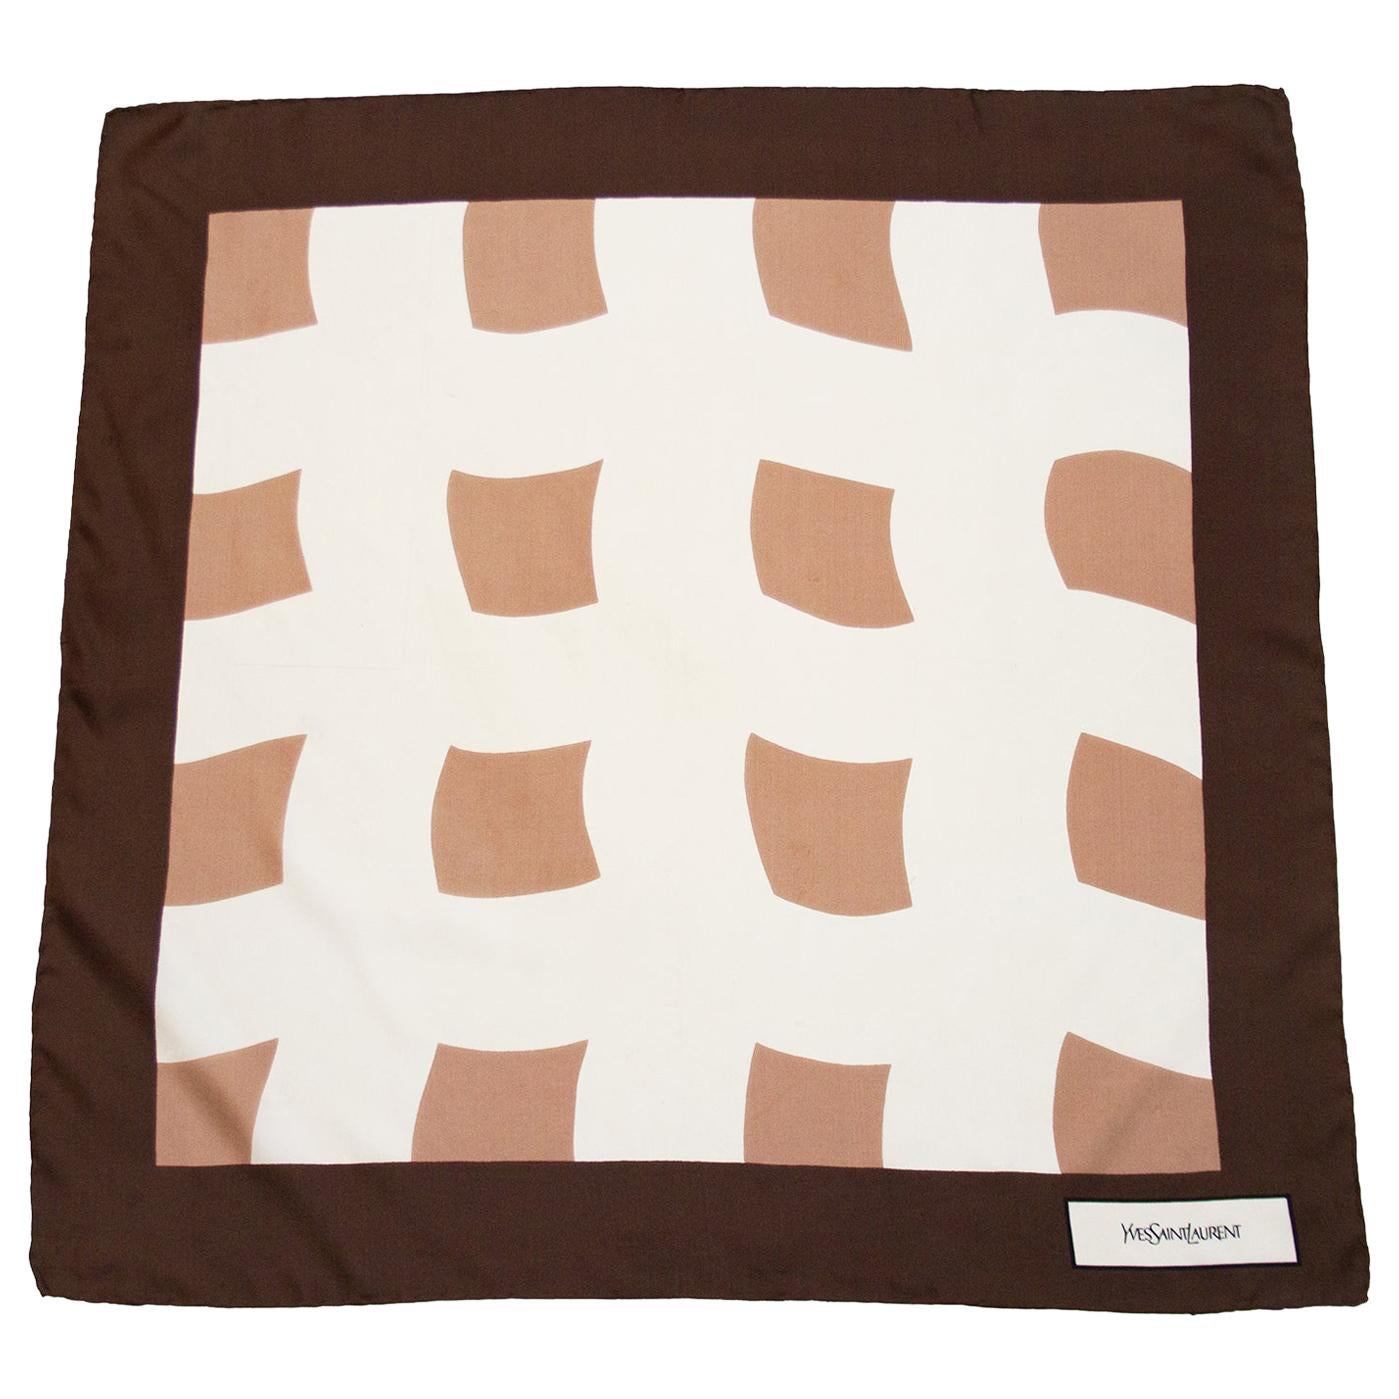 1970s Yves Saint Laurent Brown and Cream Silk Scarf 